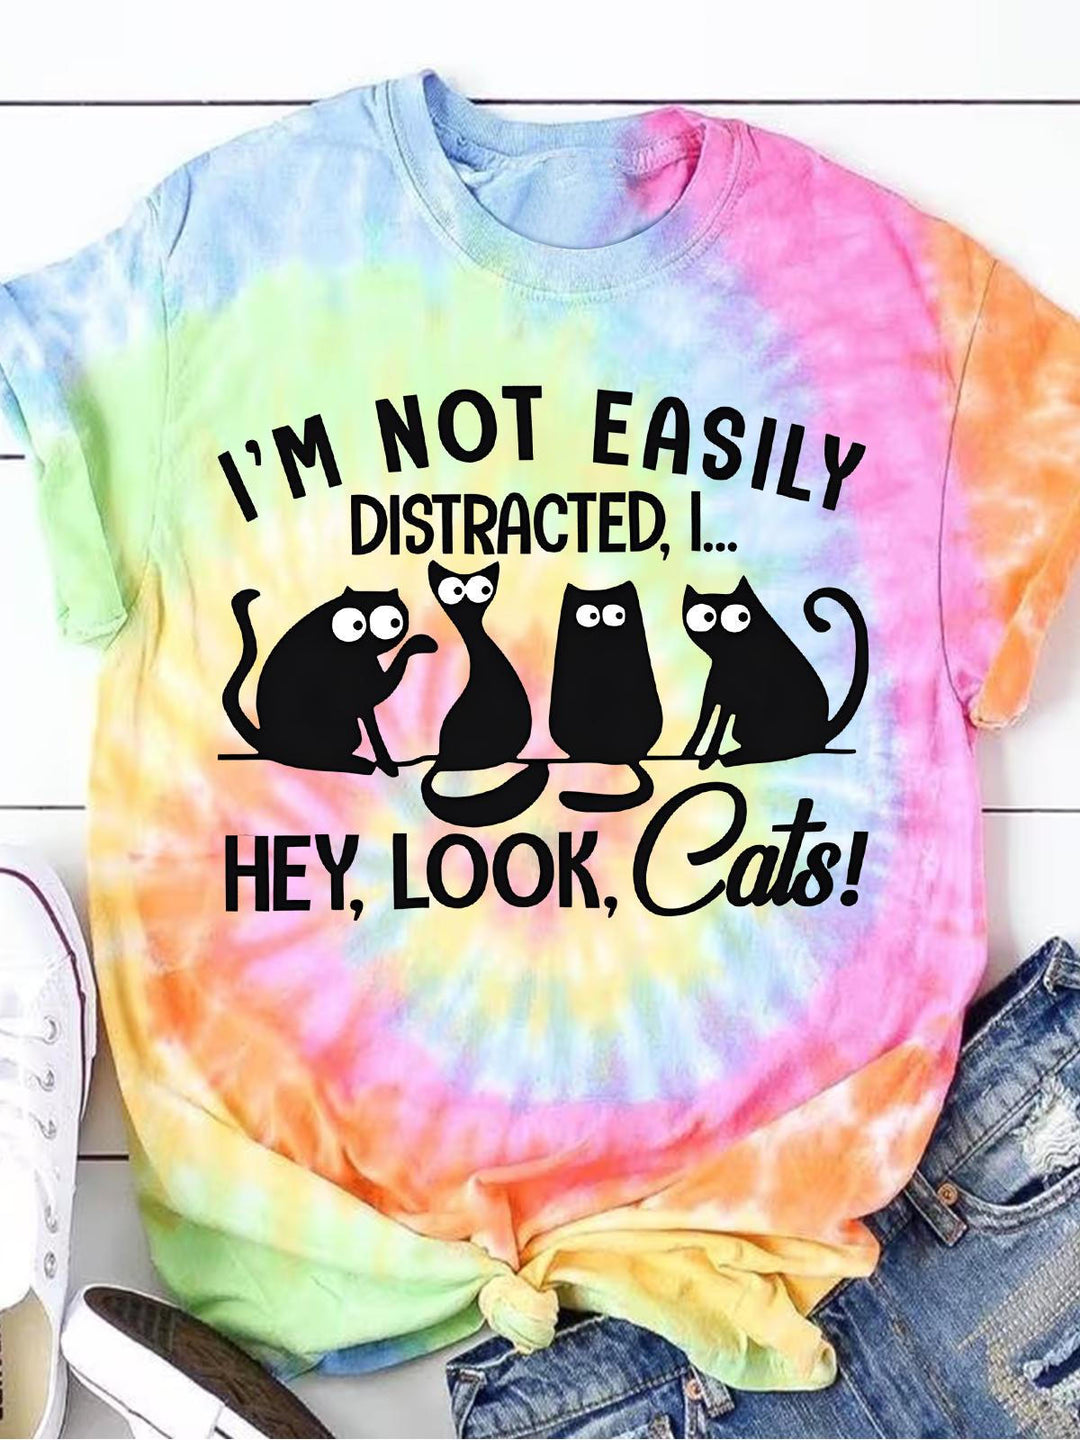 I'm Not Easily Distracked Rainbow Tie Dye T-shirt